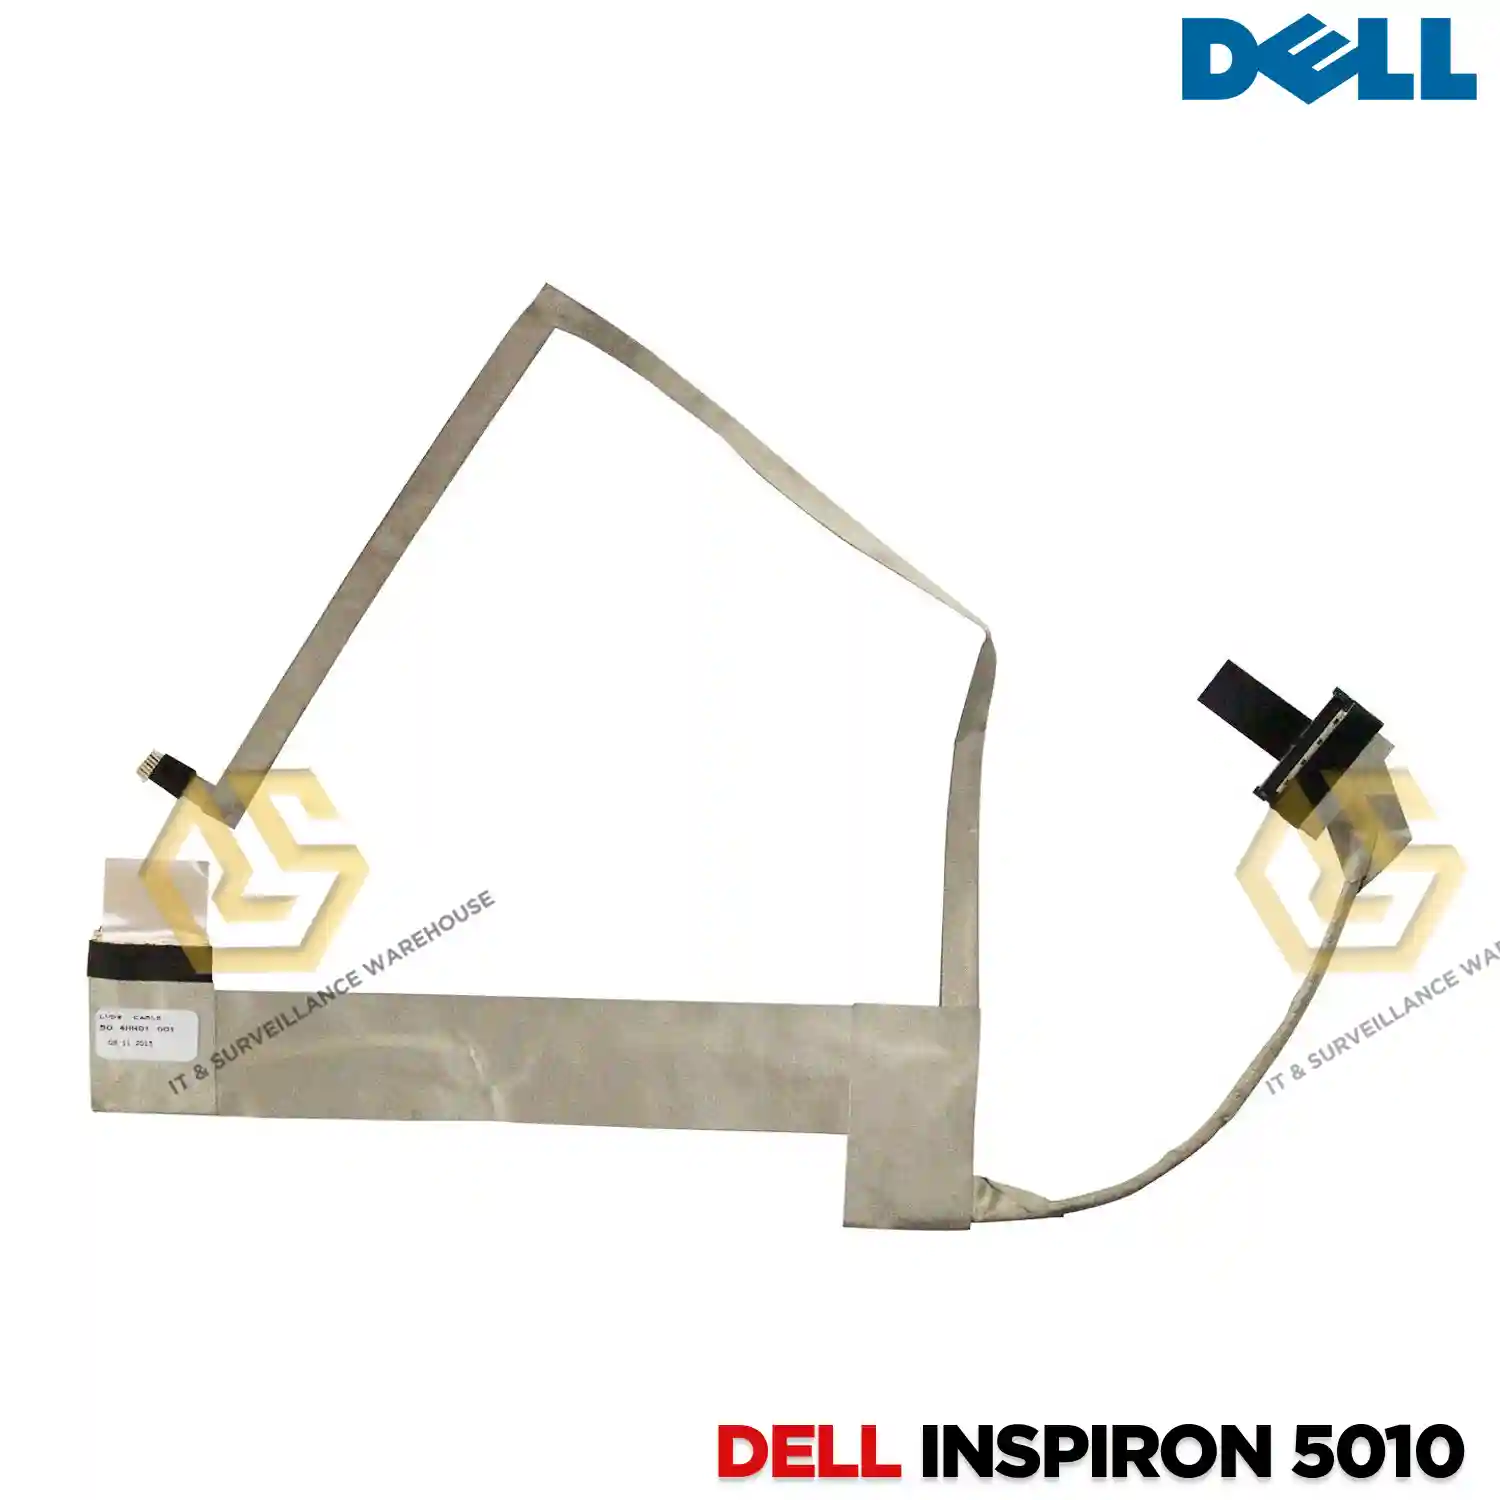 LAPTOP DISPLAY CABLE FOR DELL N5010 | M5010 | DG15